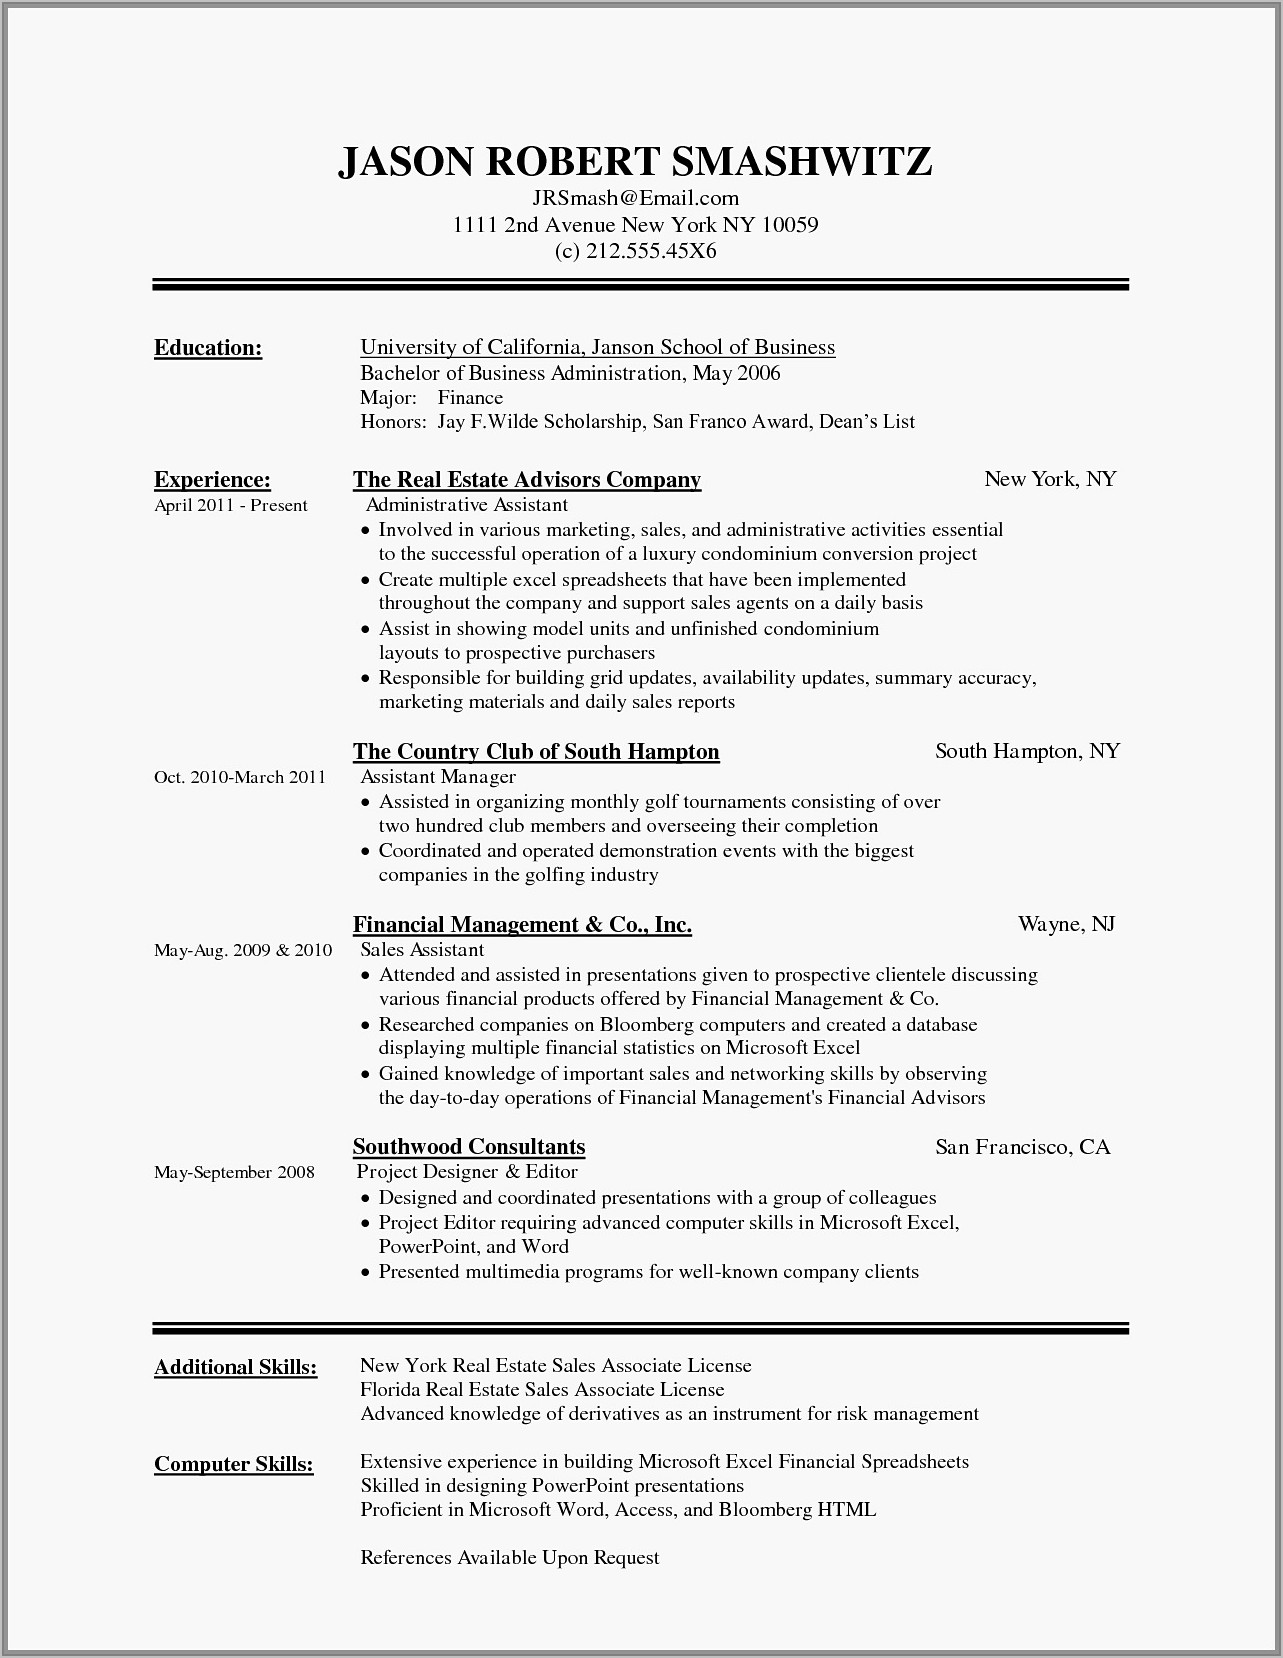 Free Resume Samples For Experienced Professionals